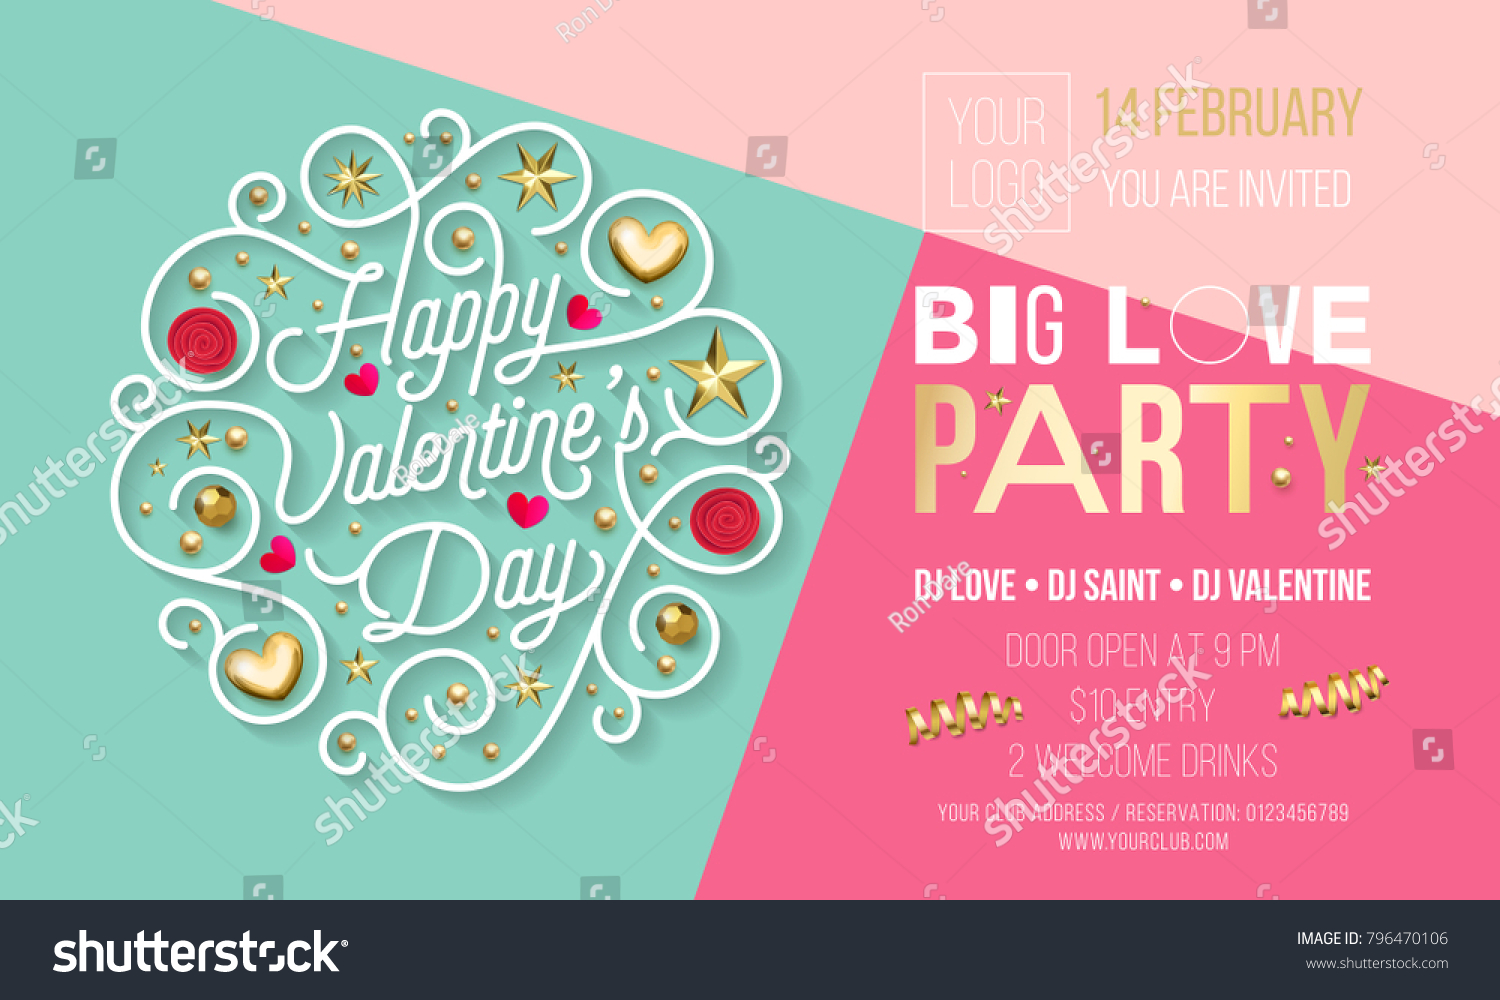 Valentine Day Party Invitation Design Template Stock Vector Royalty Free 796470106 Shutterstock